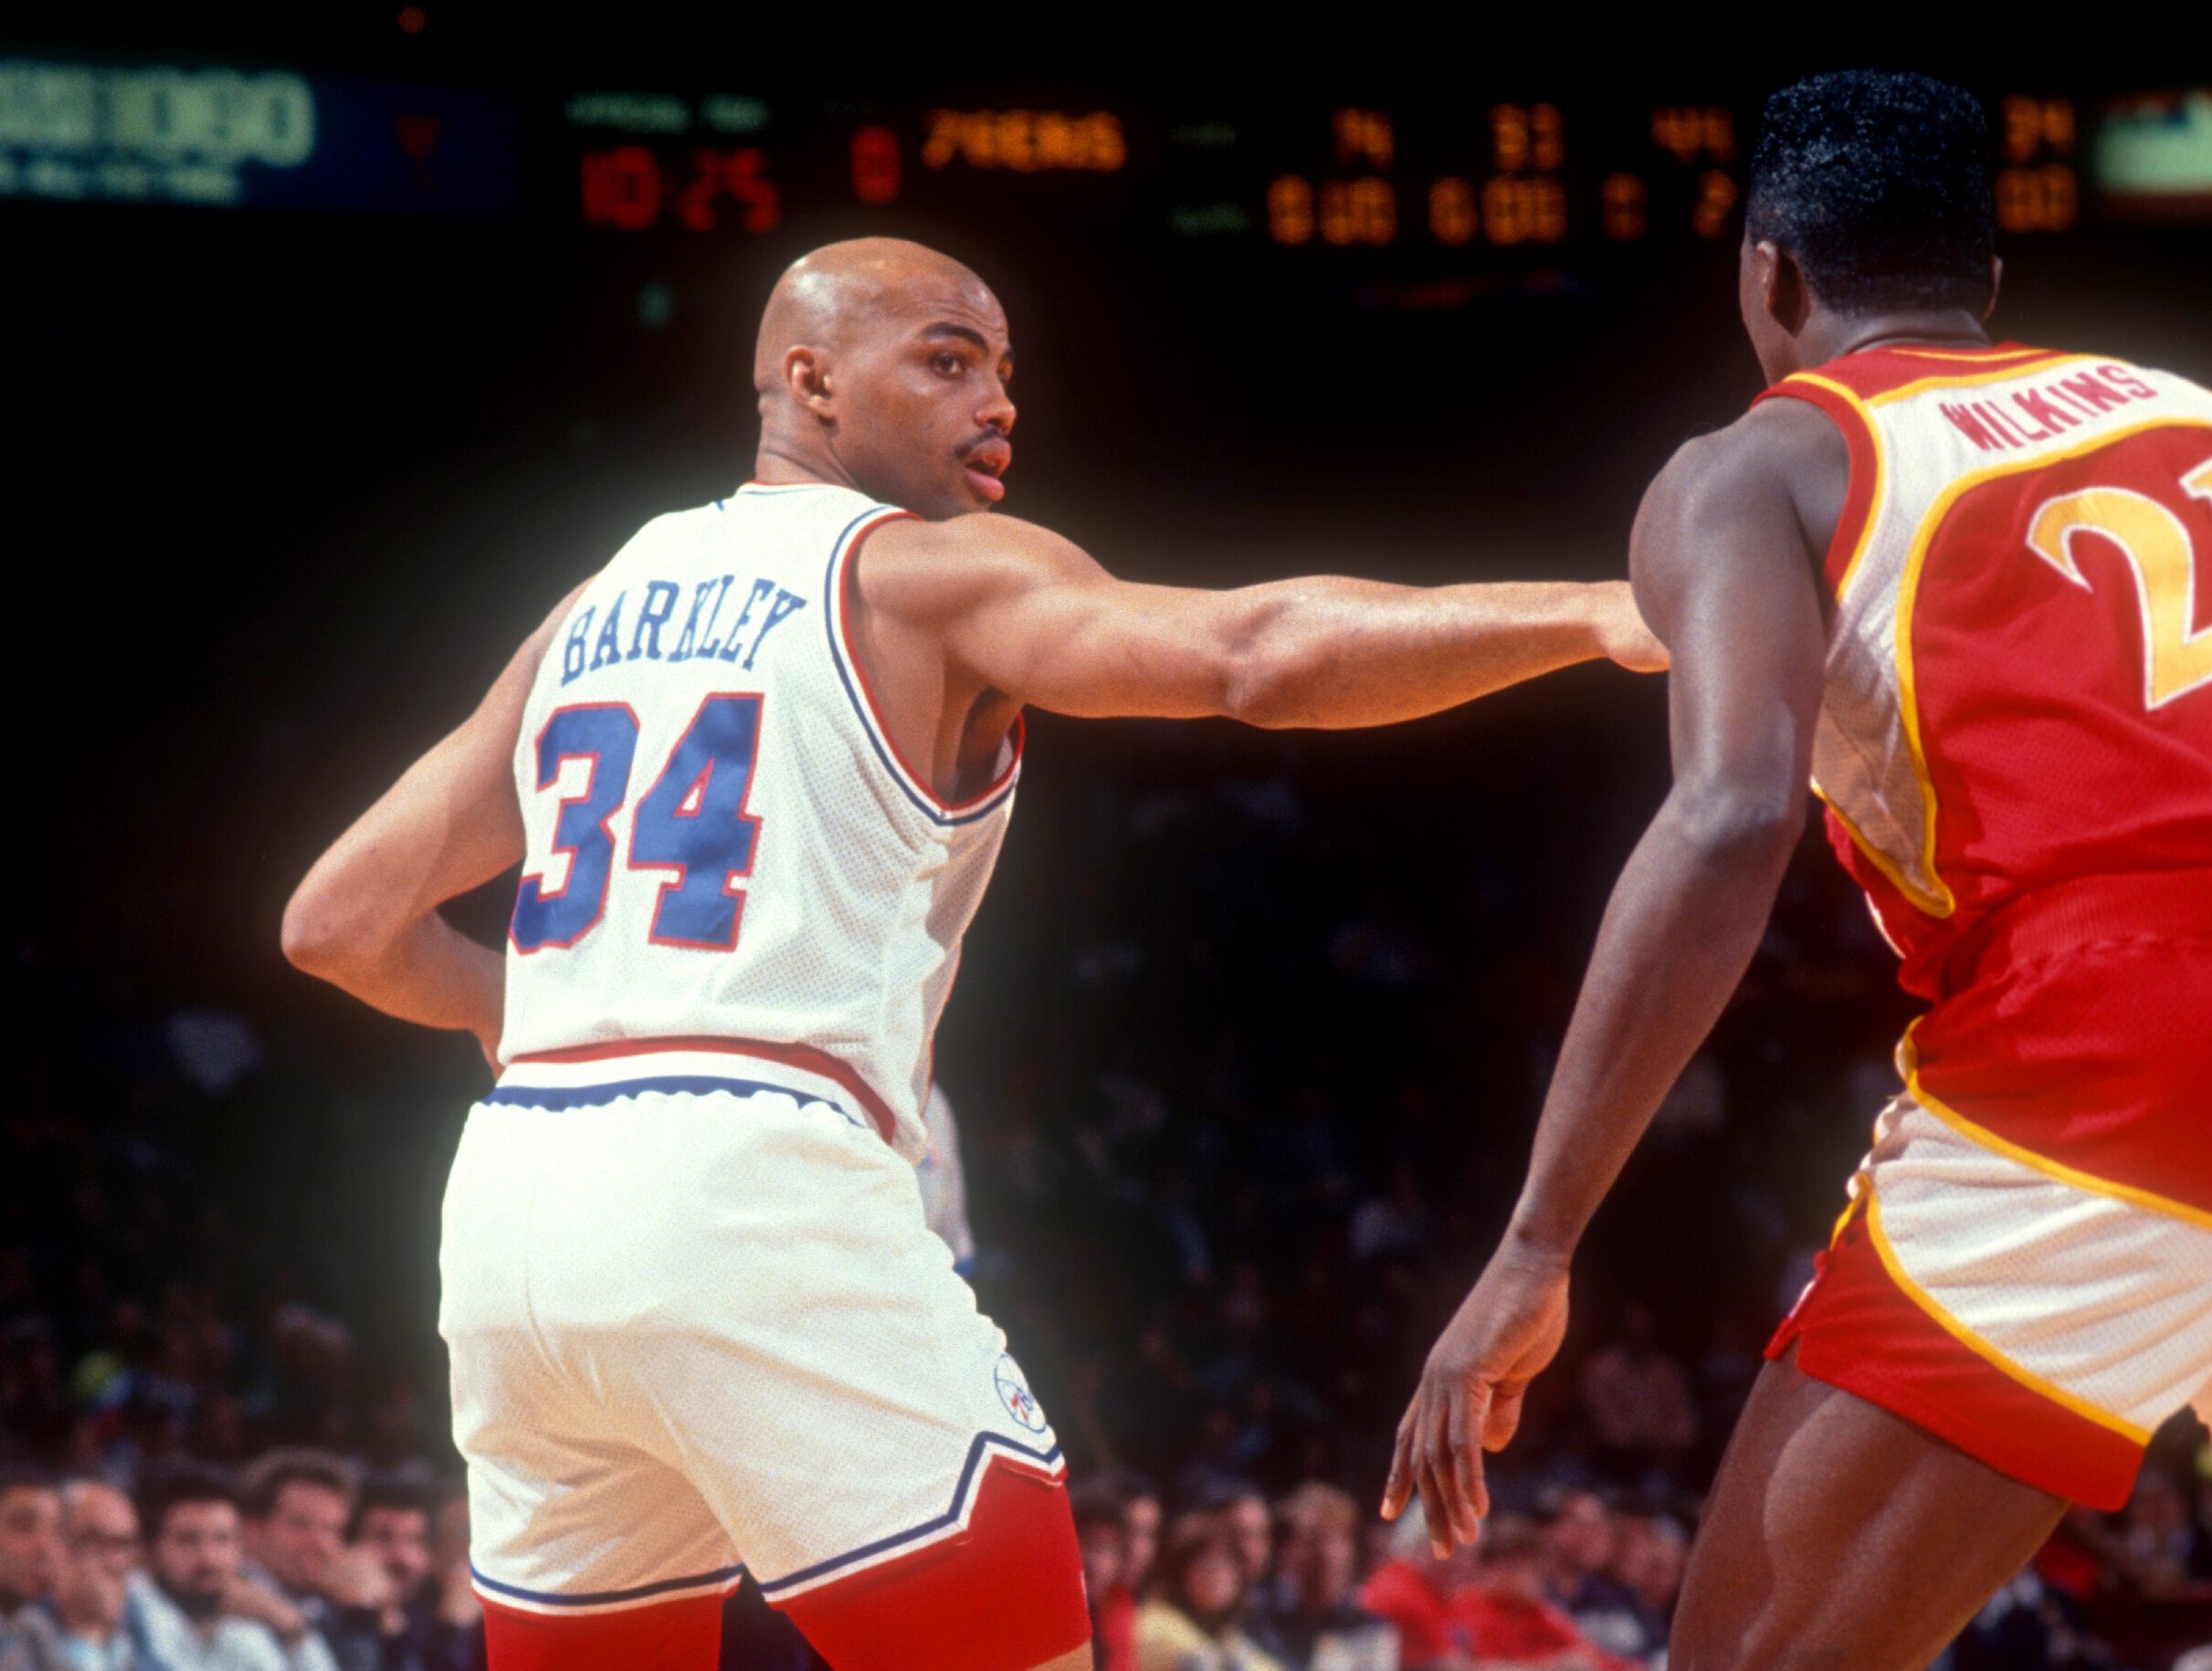 Charles Barkley of the Philadelphia 76ers looks to pass as Dominique Wilkins of the Atlanta Hawks defends.